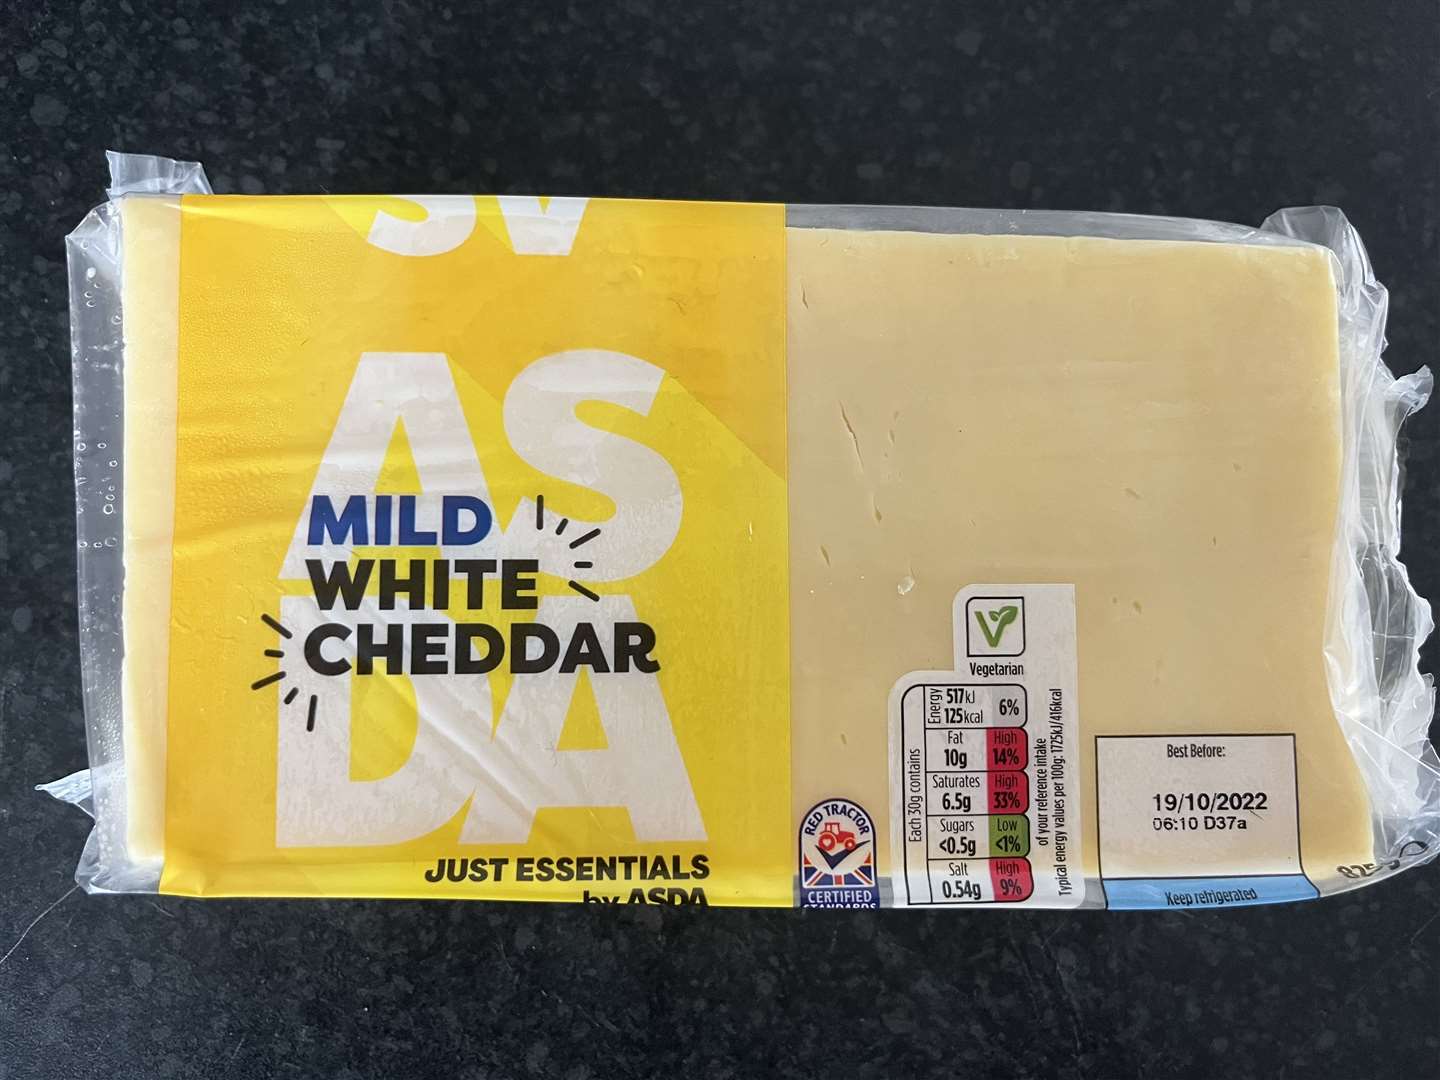 I was shocked to find that this 825 grams block of cheese was just £3.65